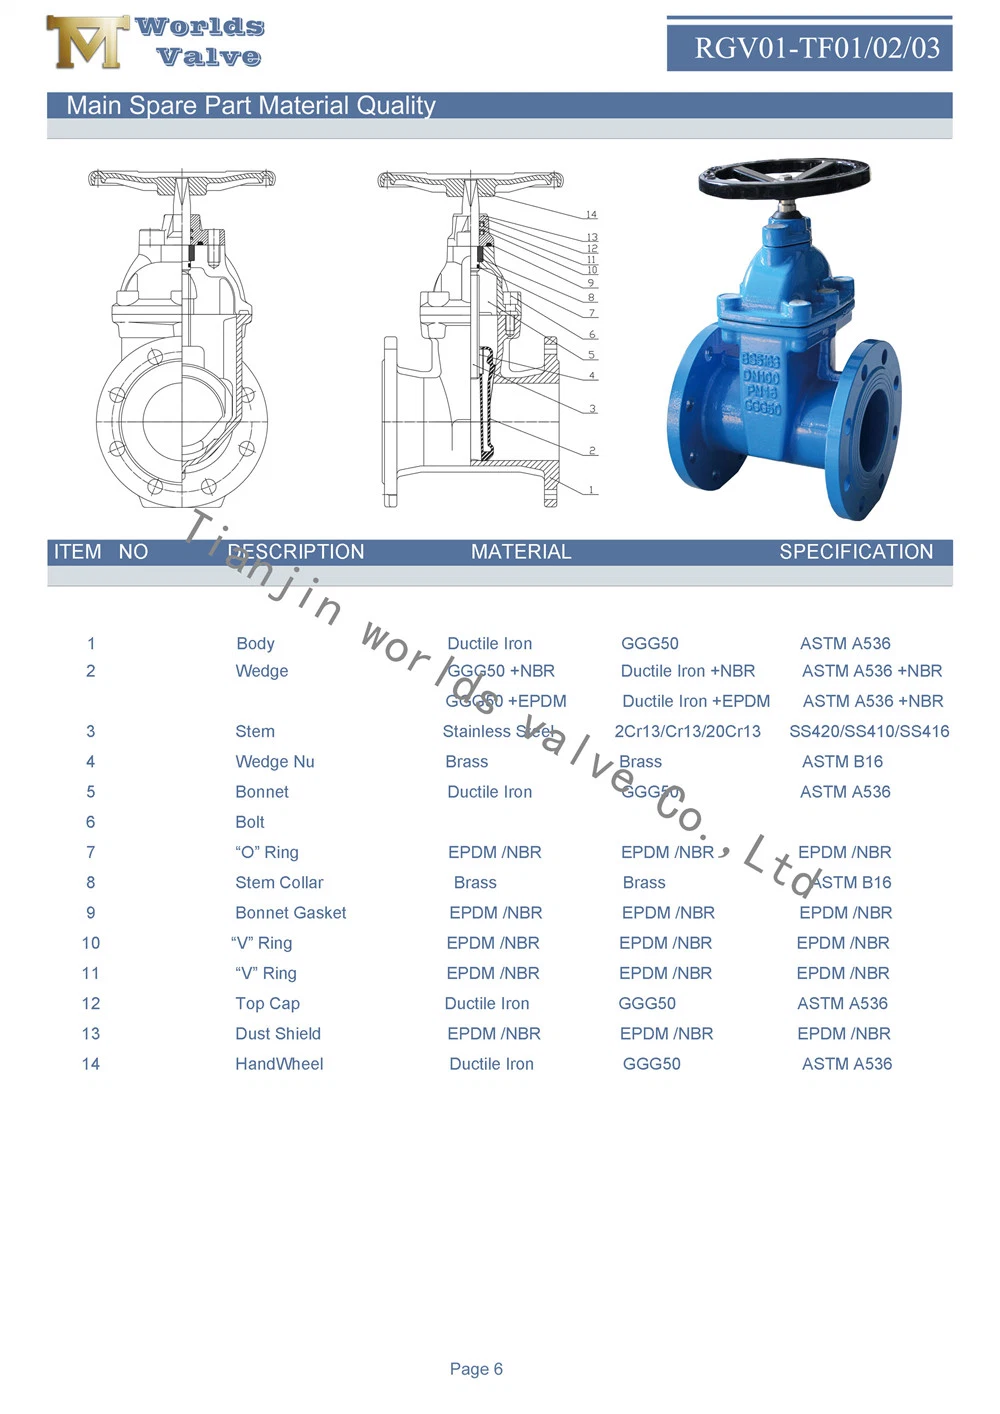 BS5163 Awwa C515 C509 DIN3202 F4 F5 Wras Acs Ce Ggg40/50 Ductile Cast Iron Non-Rising Stem OS&Y Resilient Seated Flanged Wedge Water Gate Butterfly Check Valves